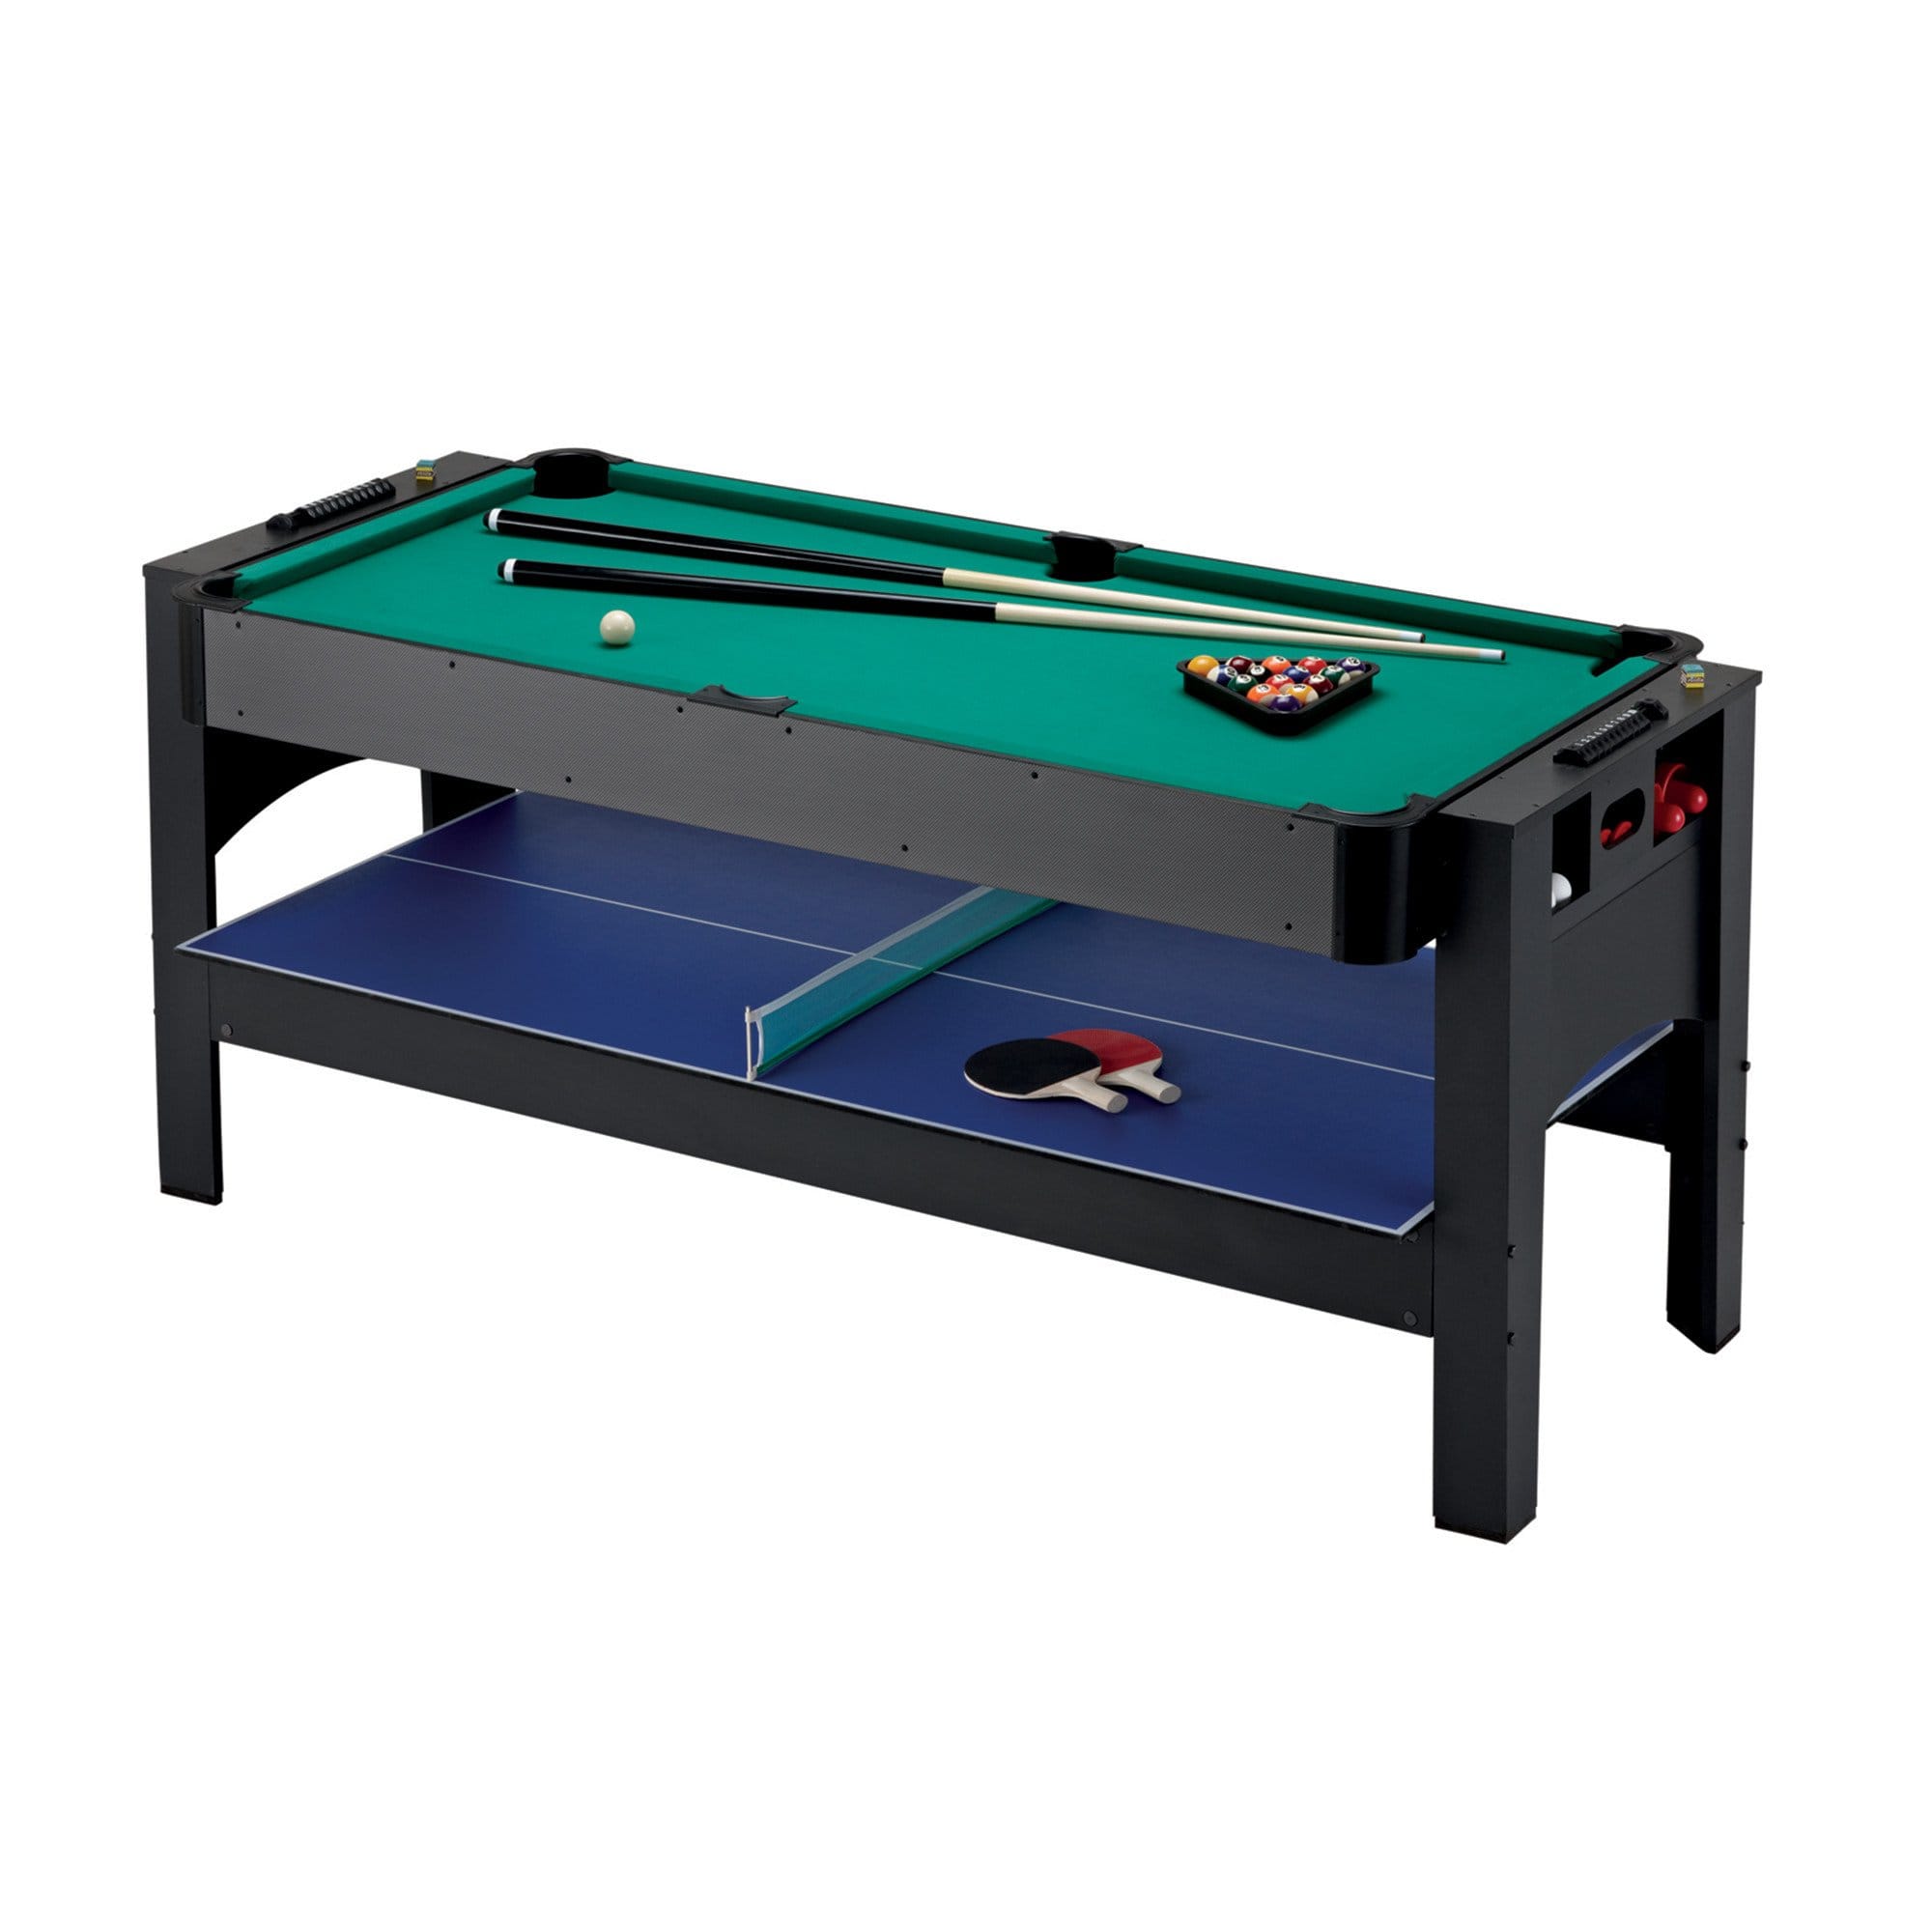 Fat Cat Multi-Game Tables Green / As shown Fat Cat 3-in-1 6' Flip Multi-Game Table